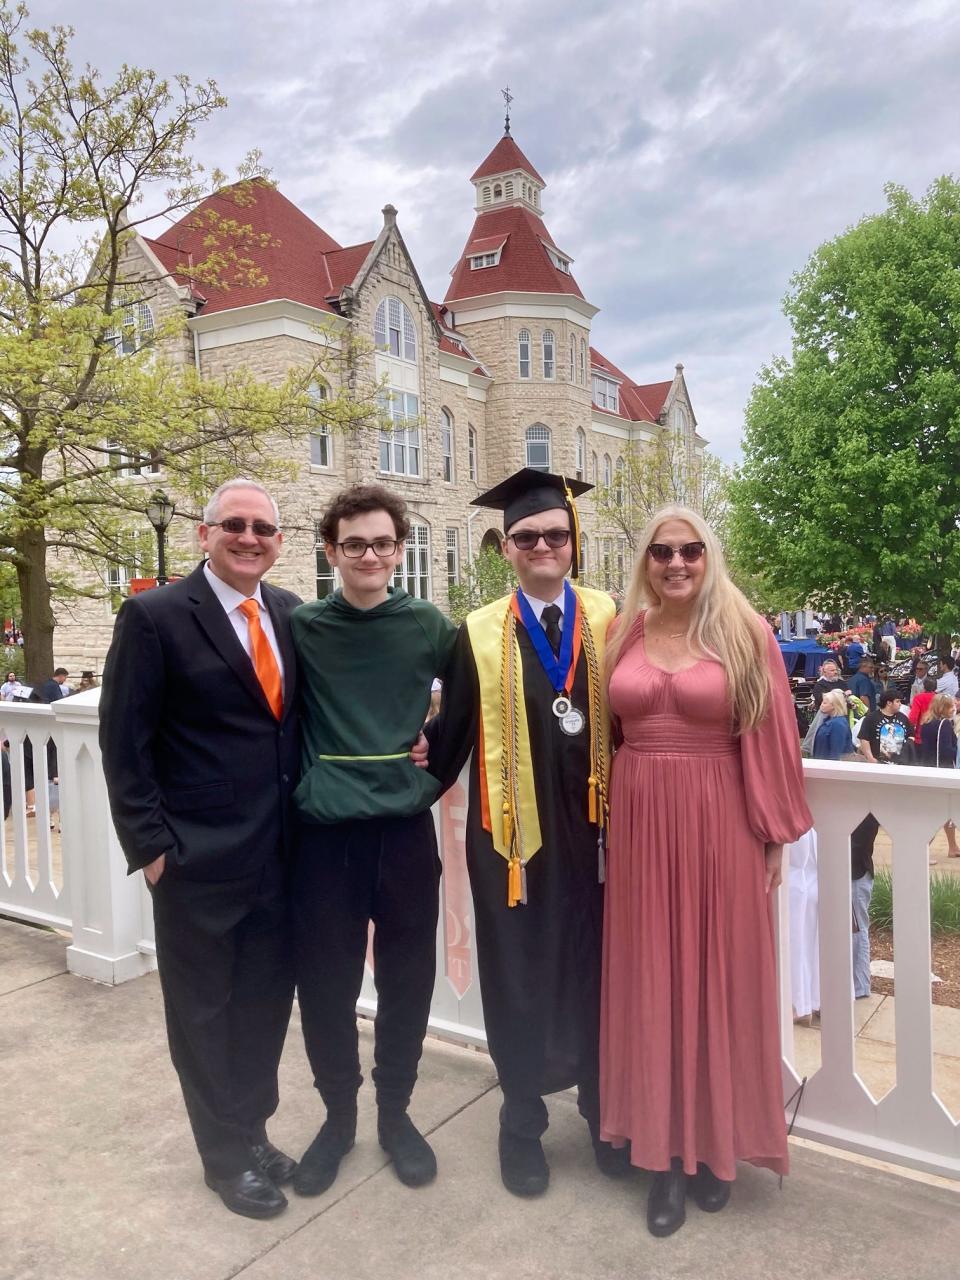 Anthony Sikorski is pictured with his family on May 13, graduation day at Carroll University in Waukesha.